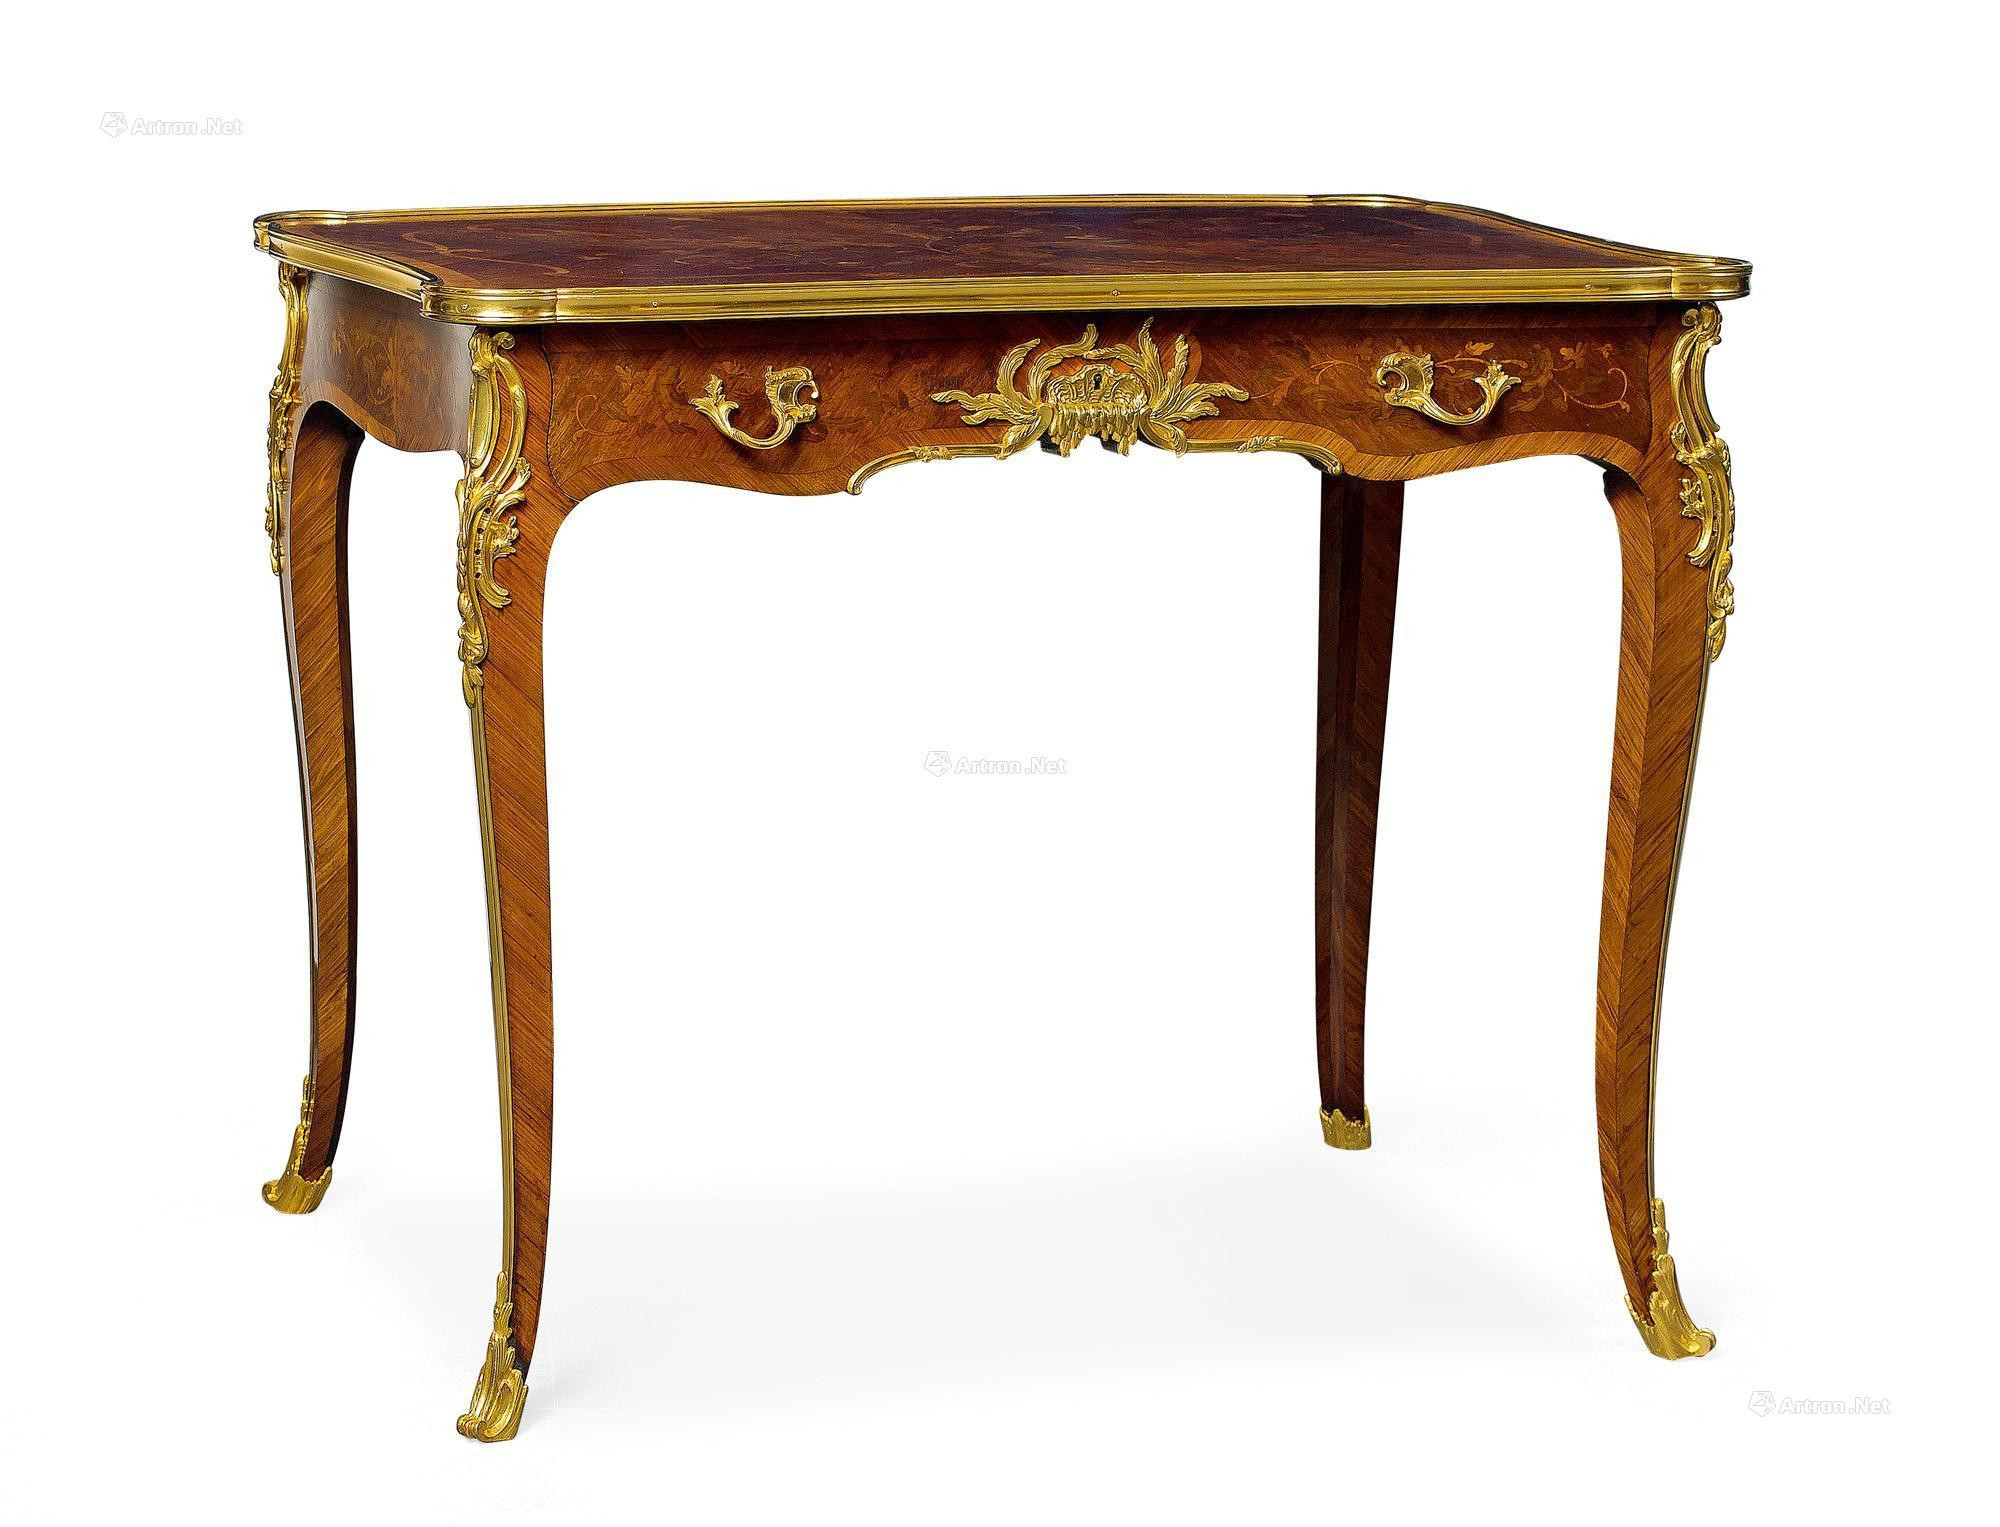 A FINE FRENCH GILT BRONZE TABLE BY FRANÇOIS LINKE， INDEX NUMBER 45